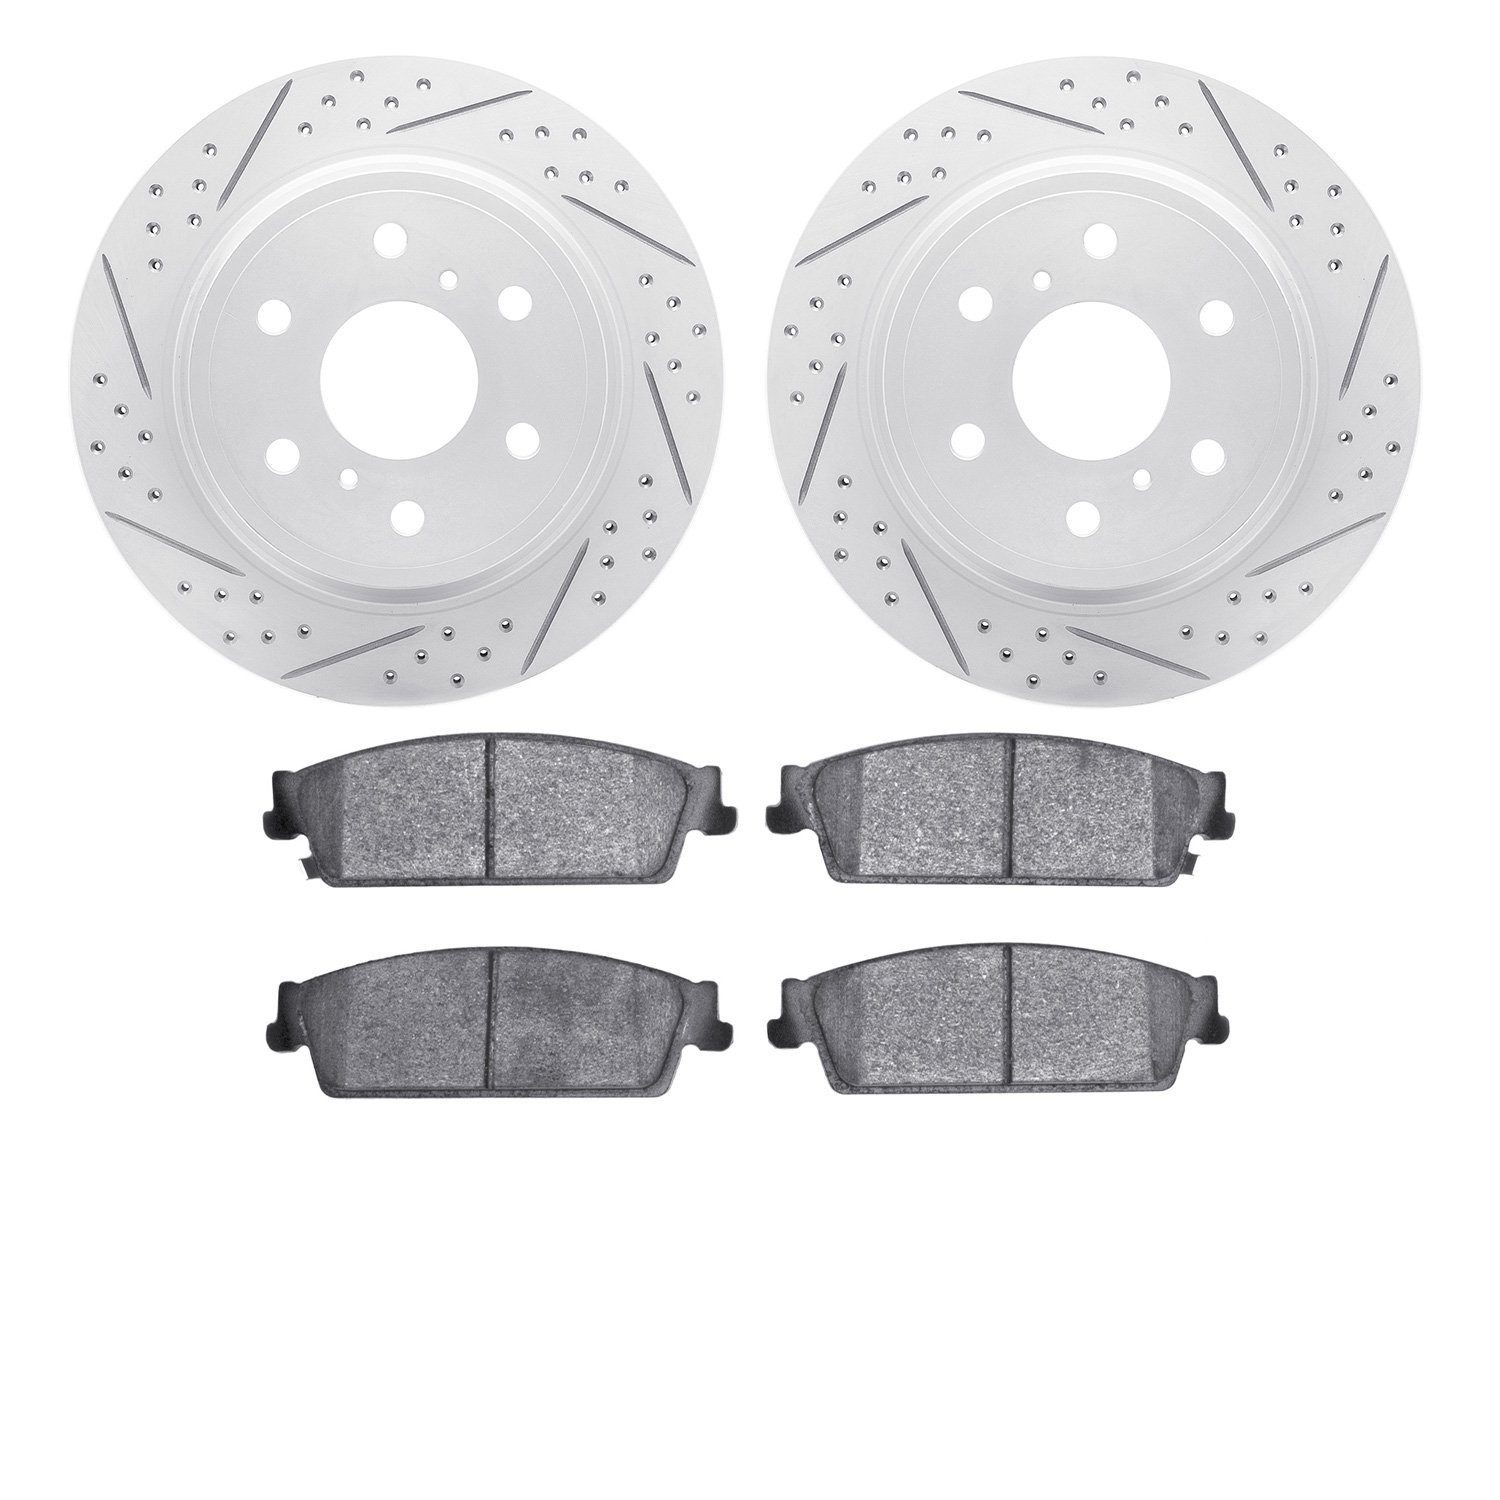 2202-48036 Geoperformance Drilled/Slotted Rotors w/Heavy-Duty Pads Kit, 2007-2014 GM, Position: Rear